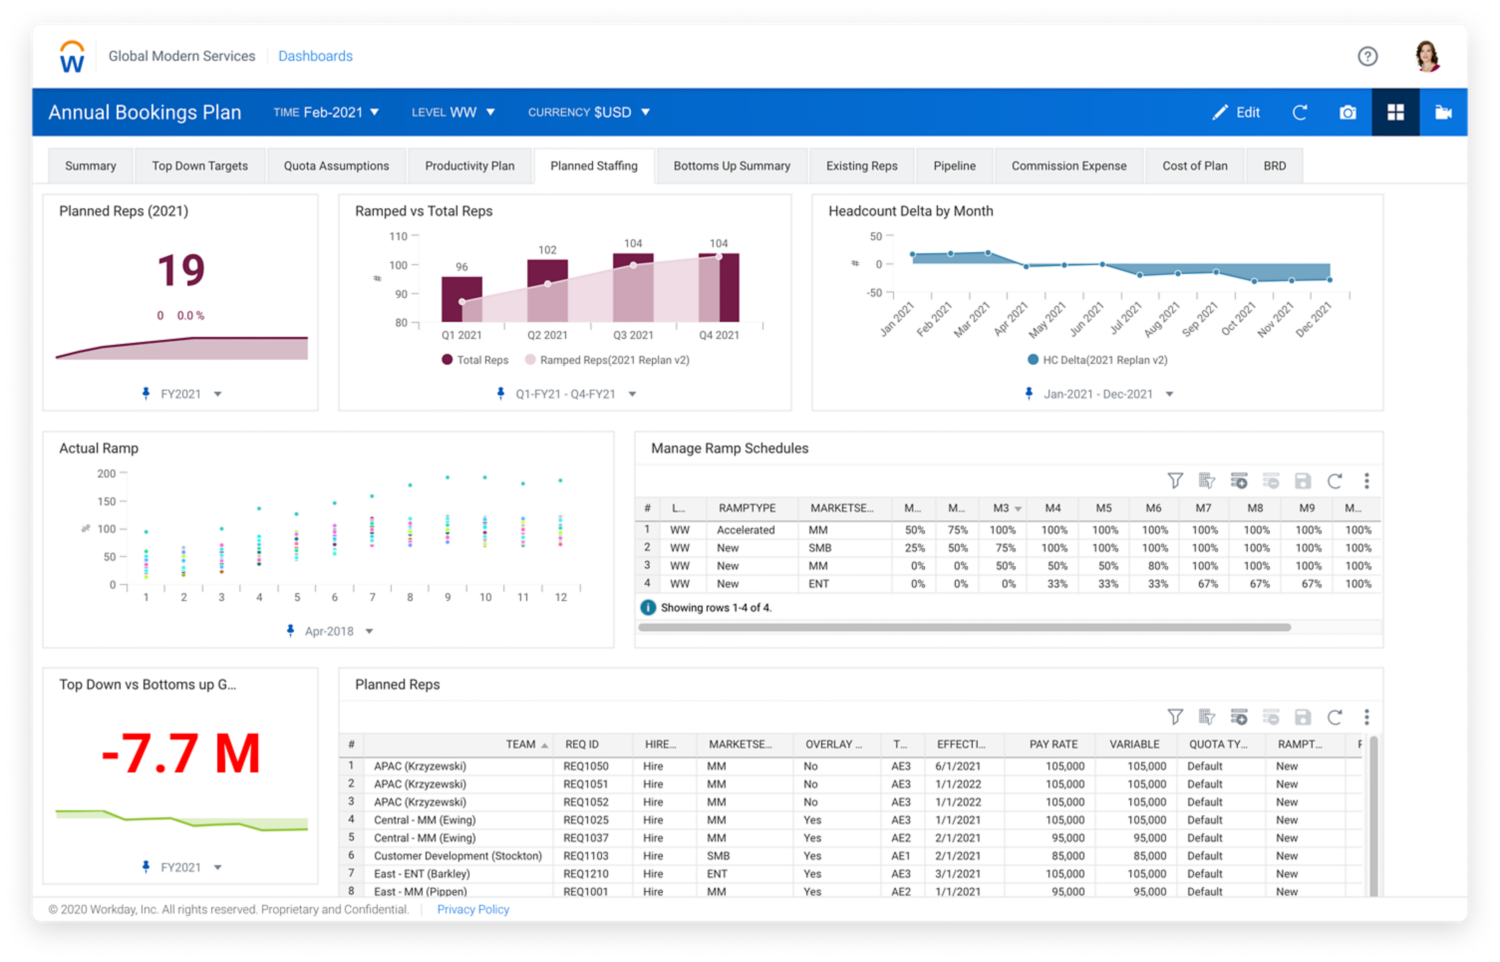 Sales capacity dashboard in Workday Adaptive Planning that shows sales capacity plans against costs and corporate strategy.